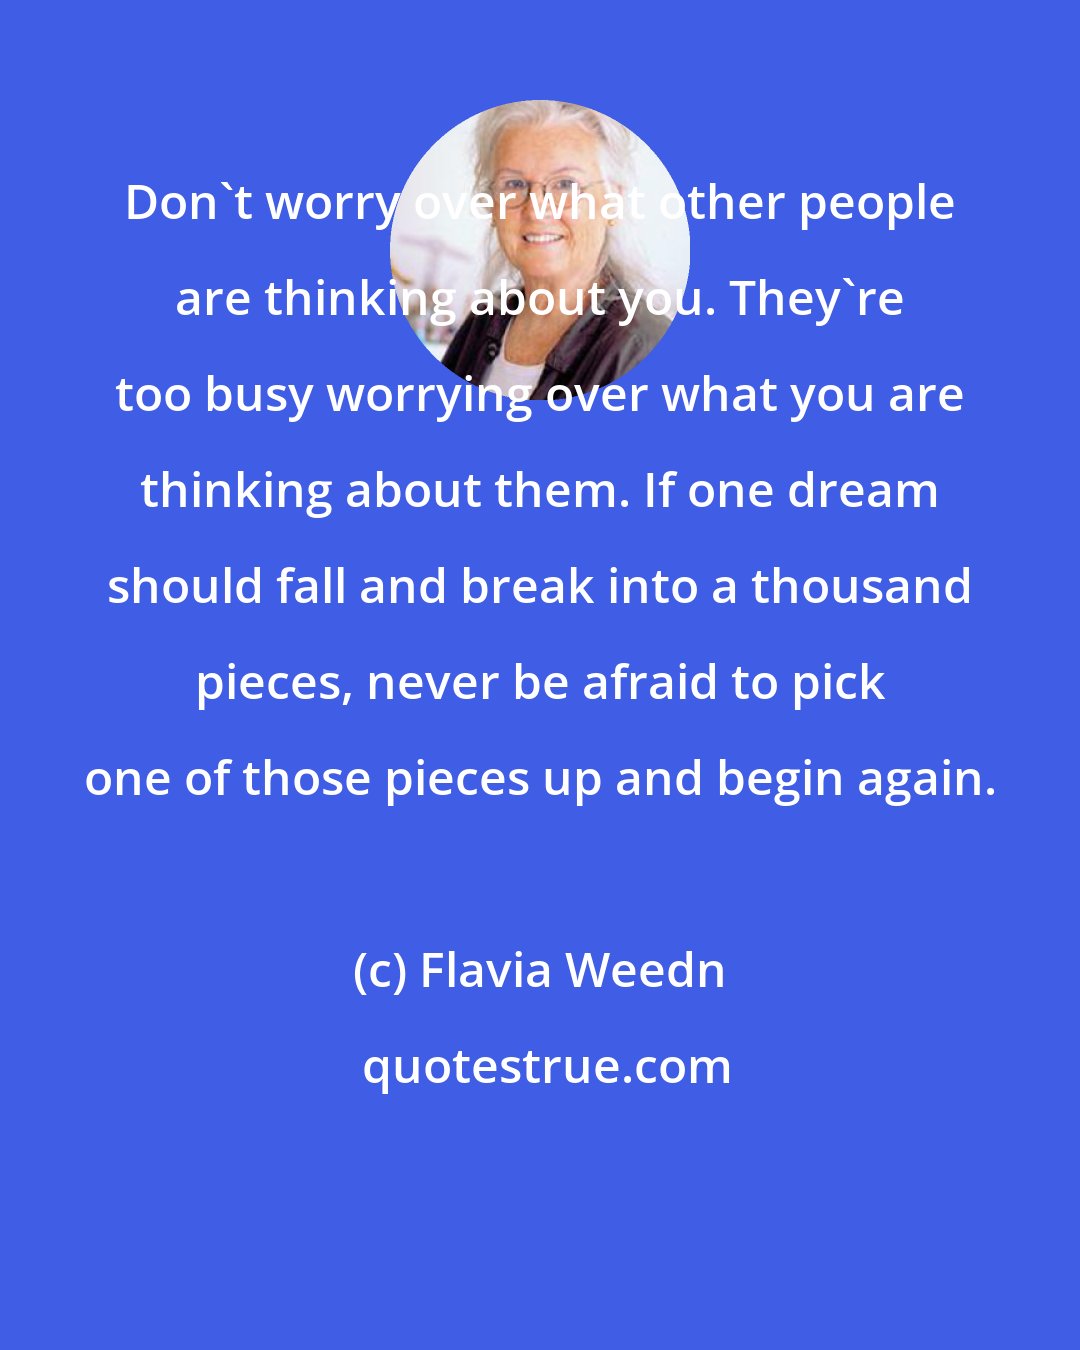 Flavia Weedn: Don't worry over what other people are thinking about you. They're too busy worrying over what you are thinking about them. If one dream should fall and break into a thousand pieces, never be afraid to pick one of those pieces up and begin again.